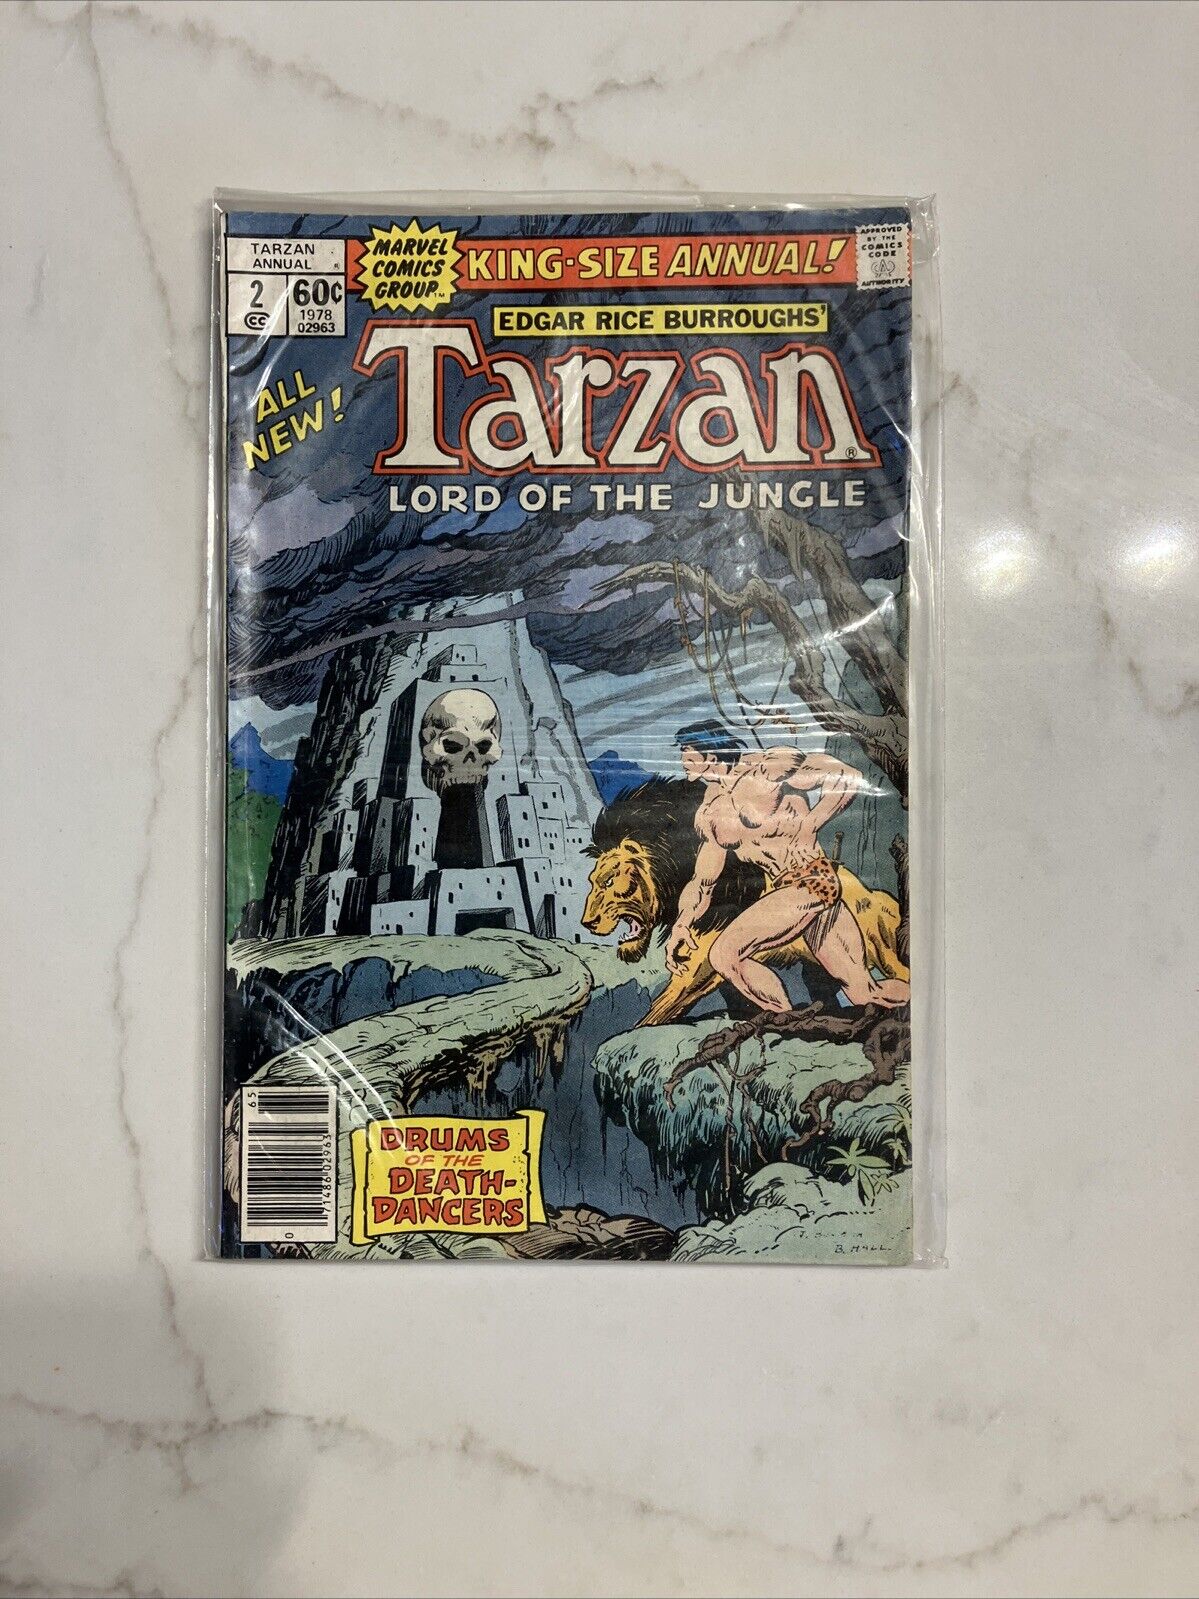 TARZAN LORD OF THE JUNGLE: KING-SIZE ANNUAL #2 (1978 ISSUE) MARVEL COMICS GROUP